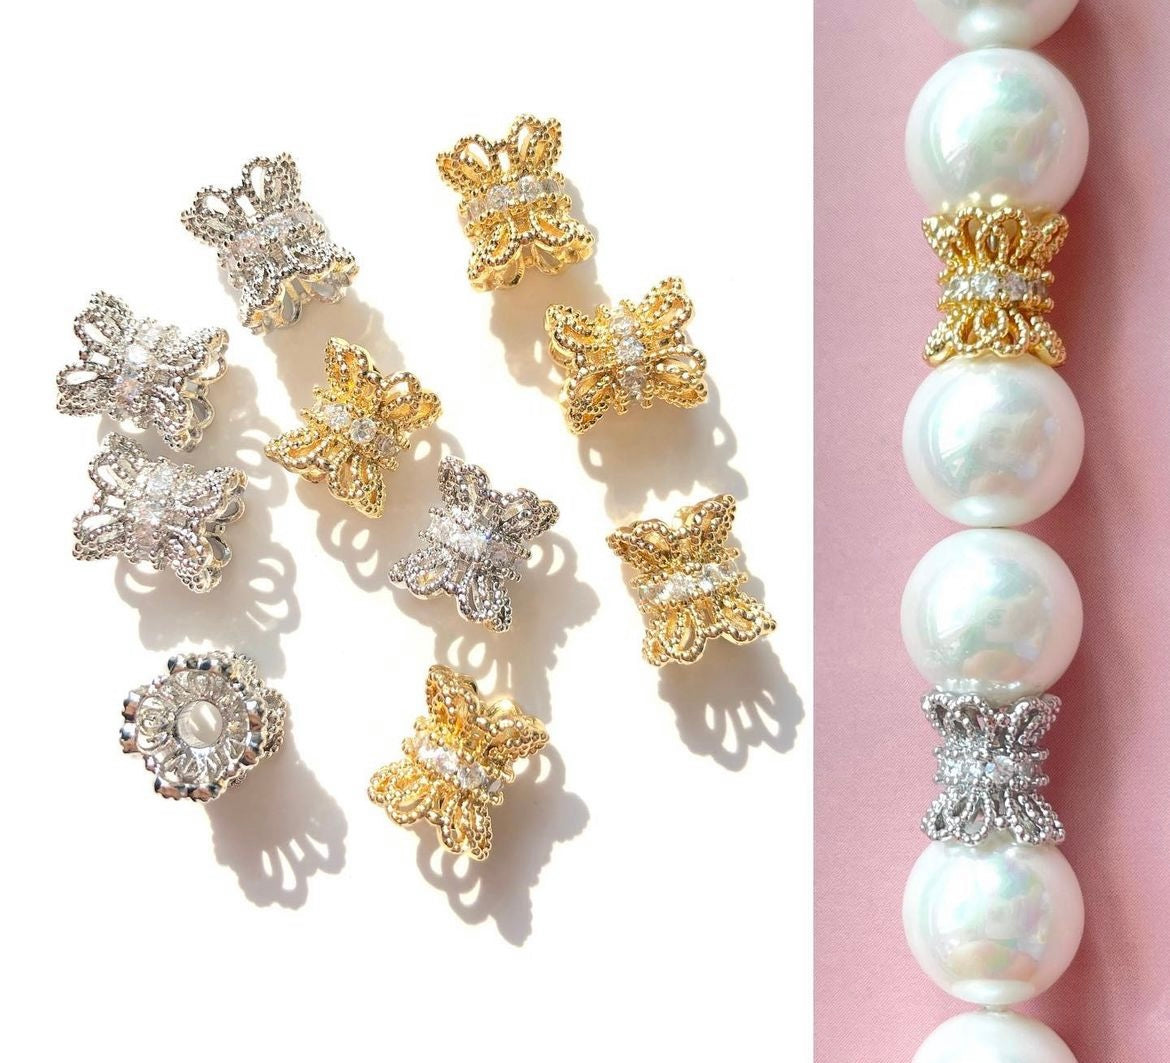 New spacer beads bundle